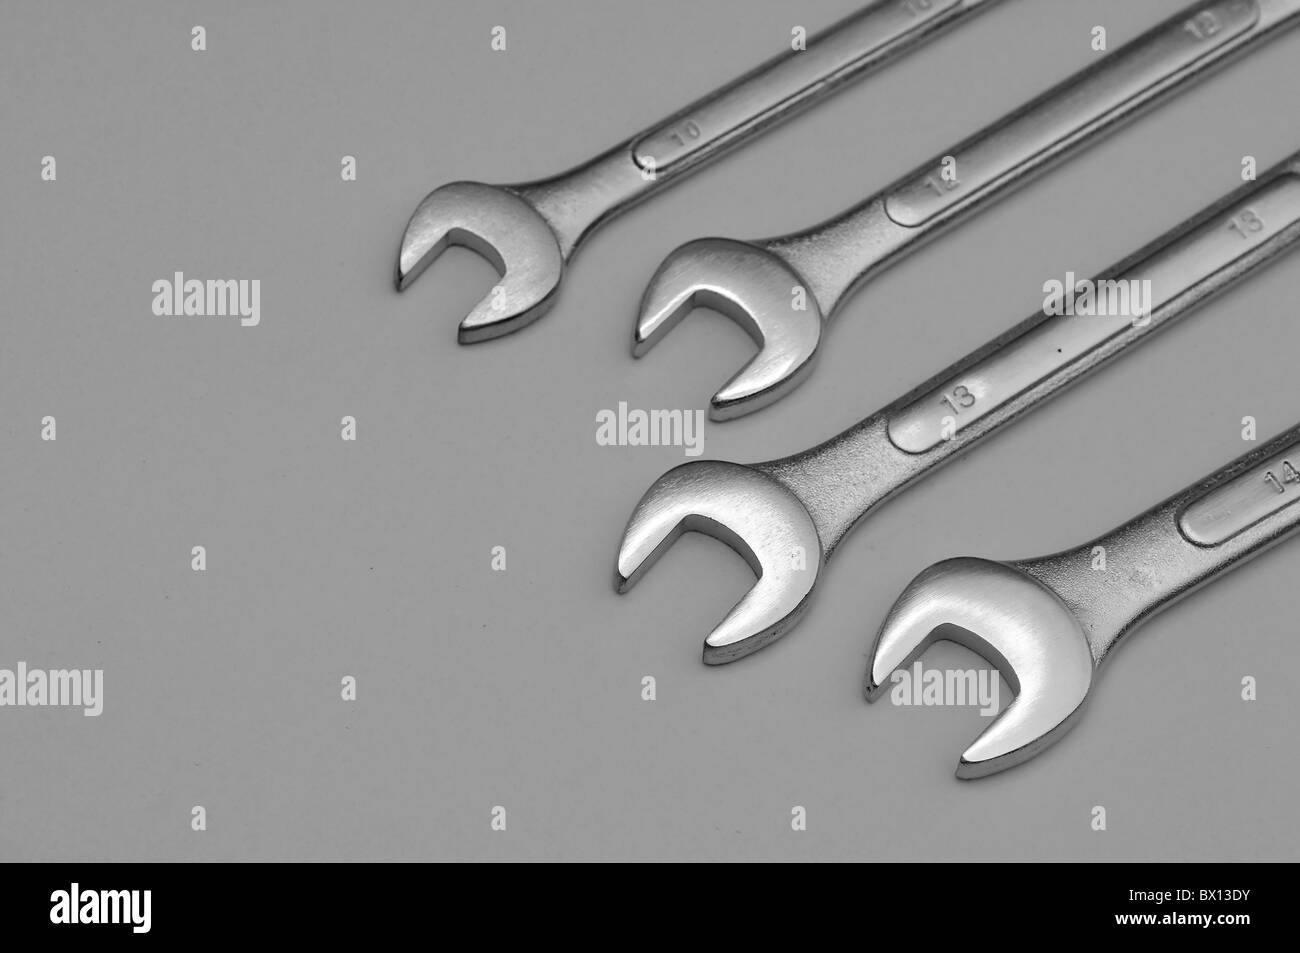 A set of spanners isolated on a light background Stock Photo